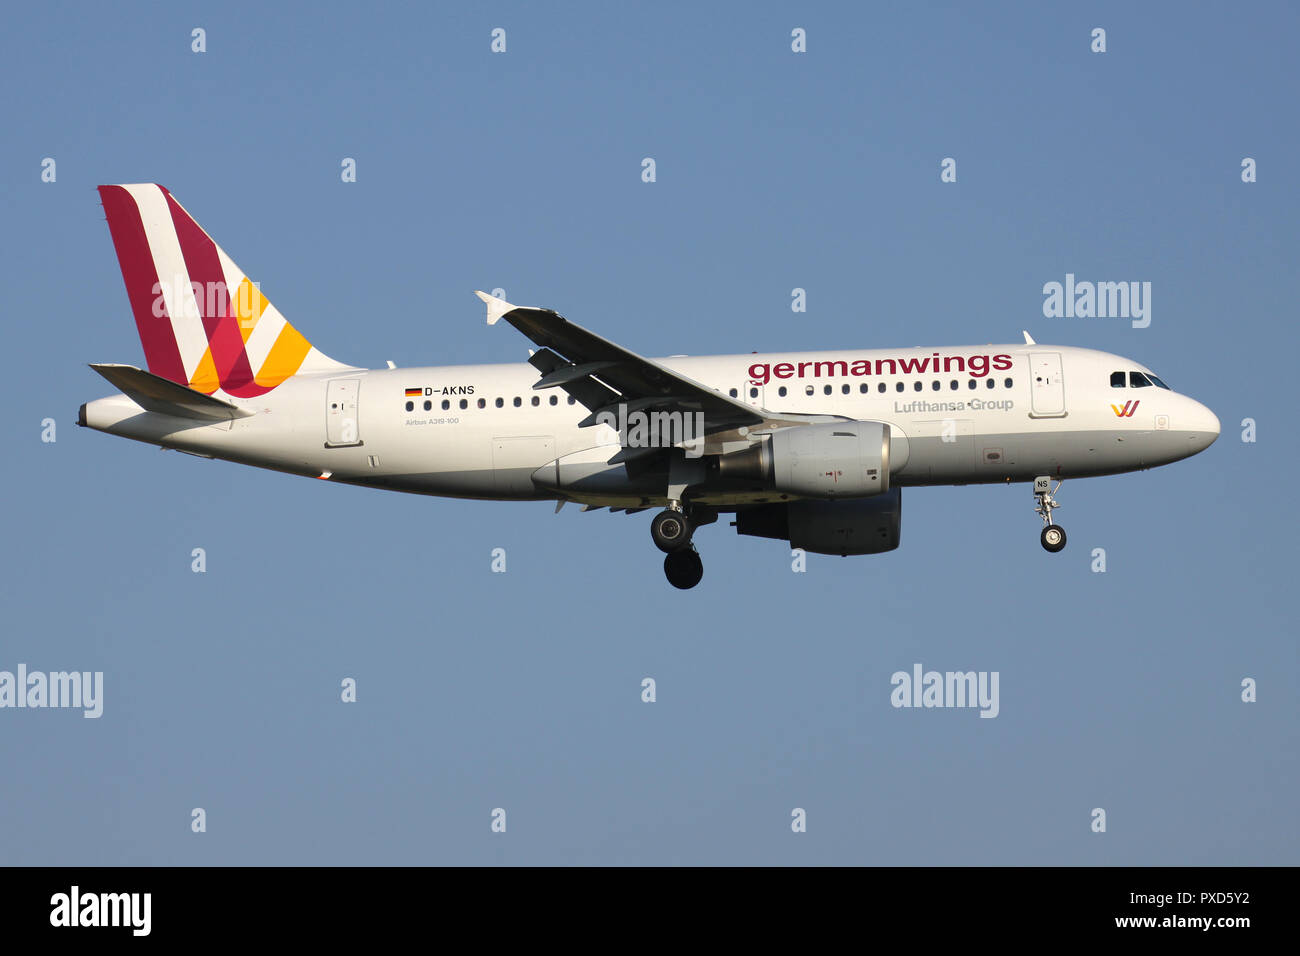 Germanwings Airbus A319-100 with registration D-AKNS on short final for runway 01 of Brussels Airport. Stock Photo